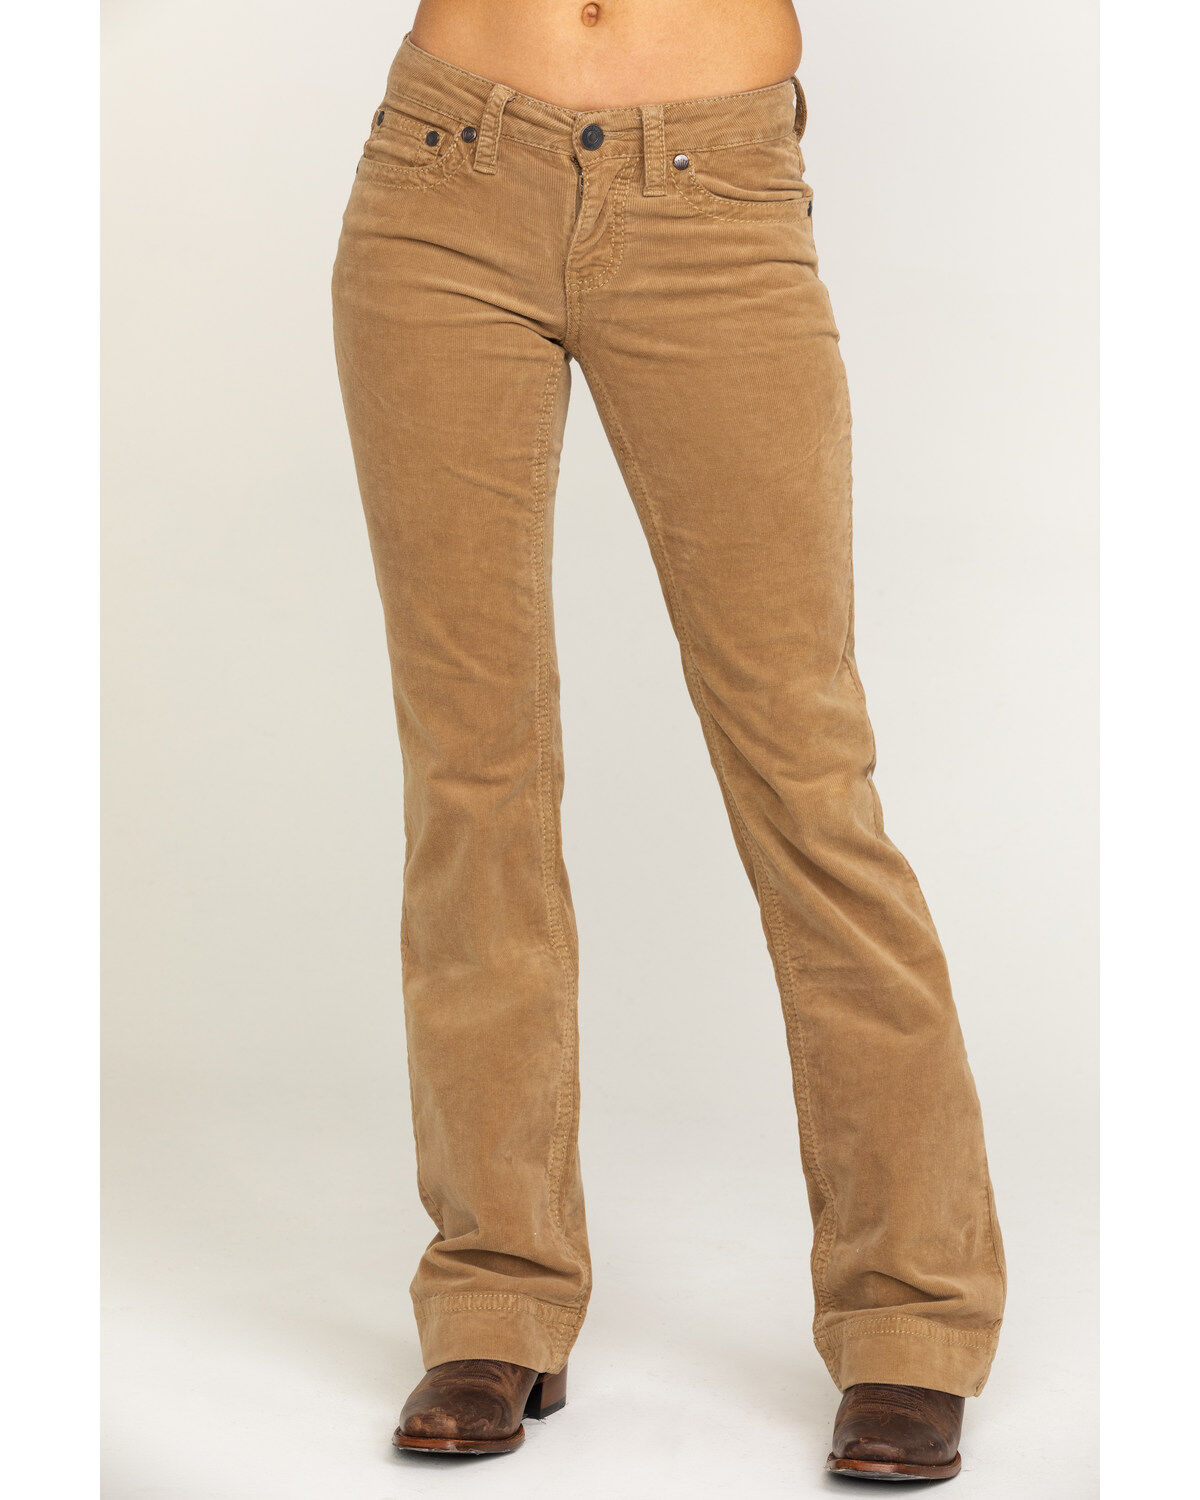 Camel Corduroy Bootcut Jeans | Boot Barn